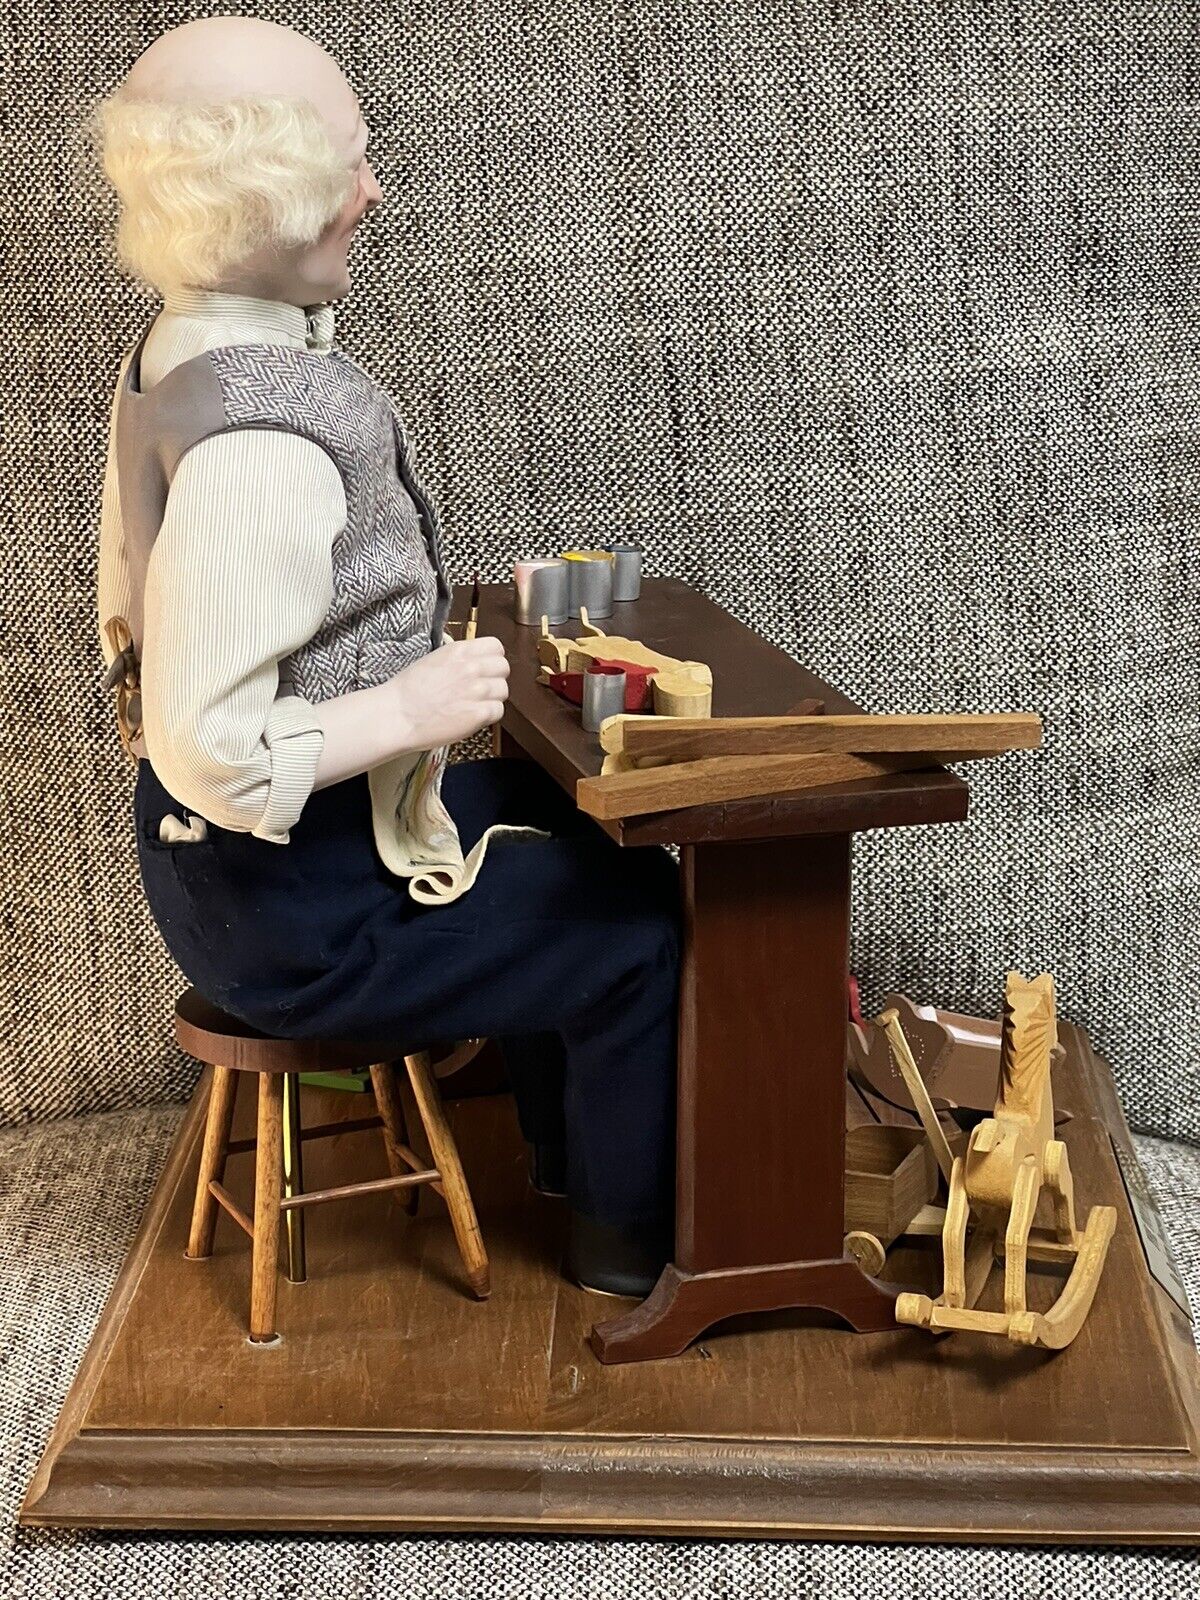 Artist Doll “The Toymaker” By Barbara Peterson Comley LE 27/350